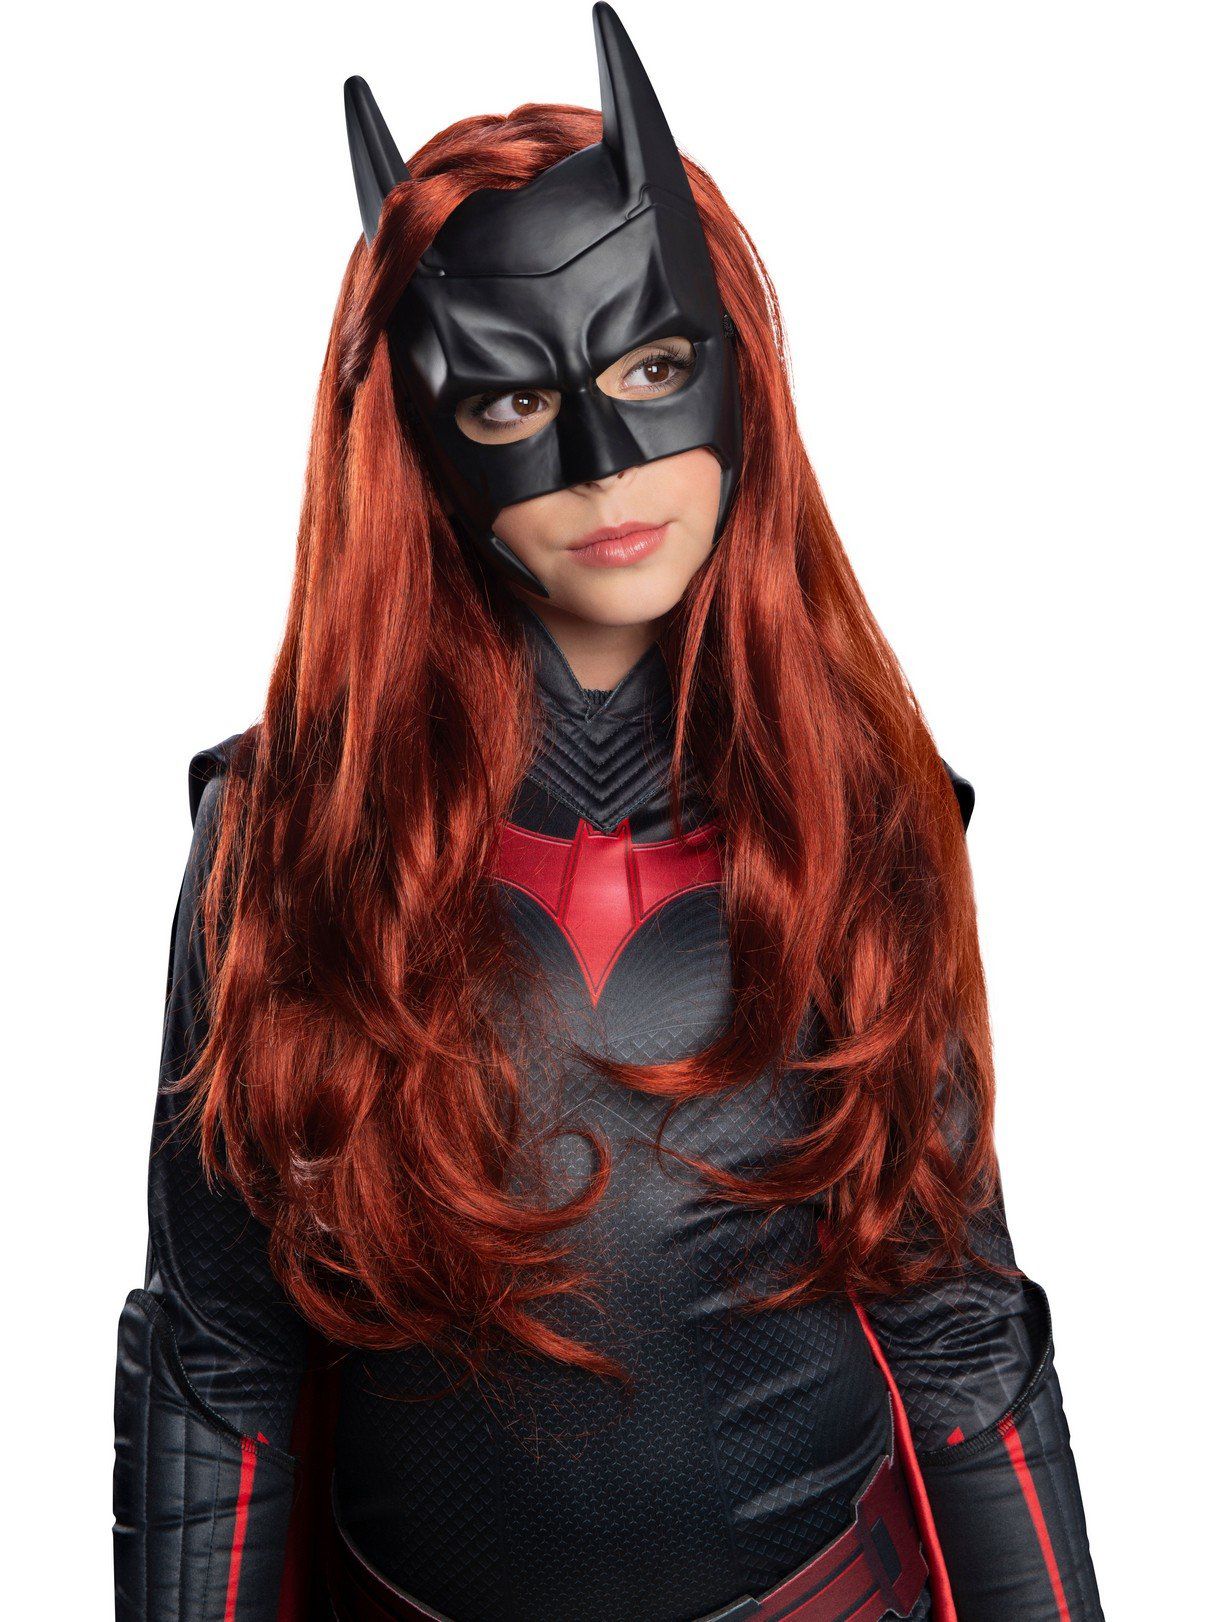 Batwoman Be Safe Mask Wallpapers